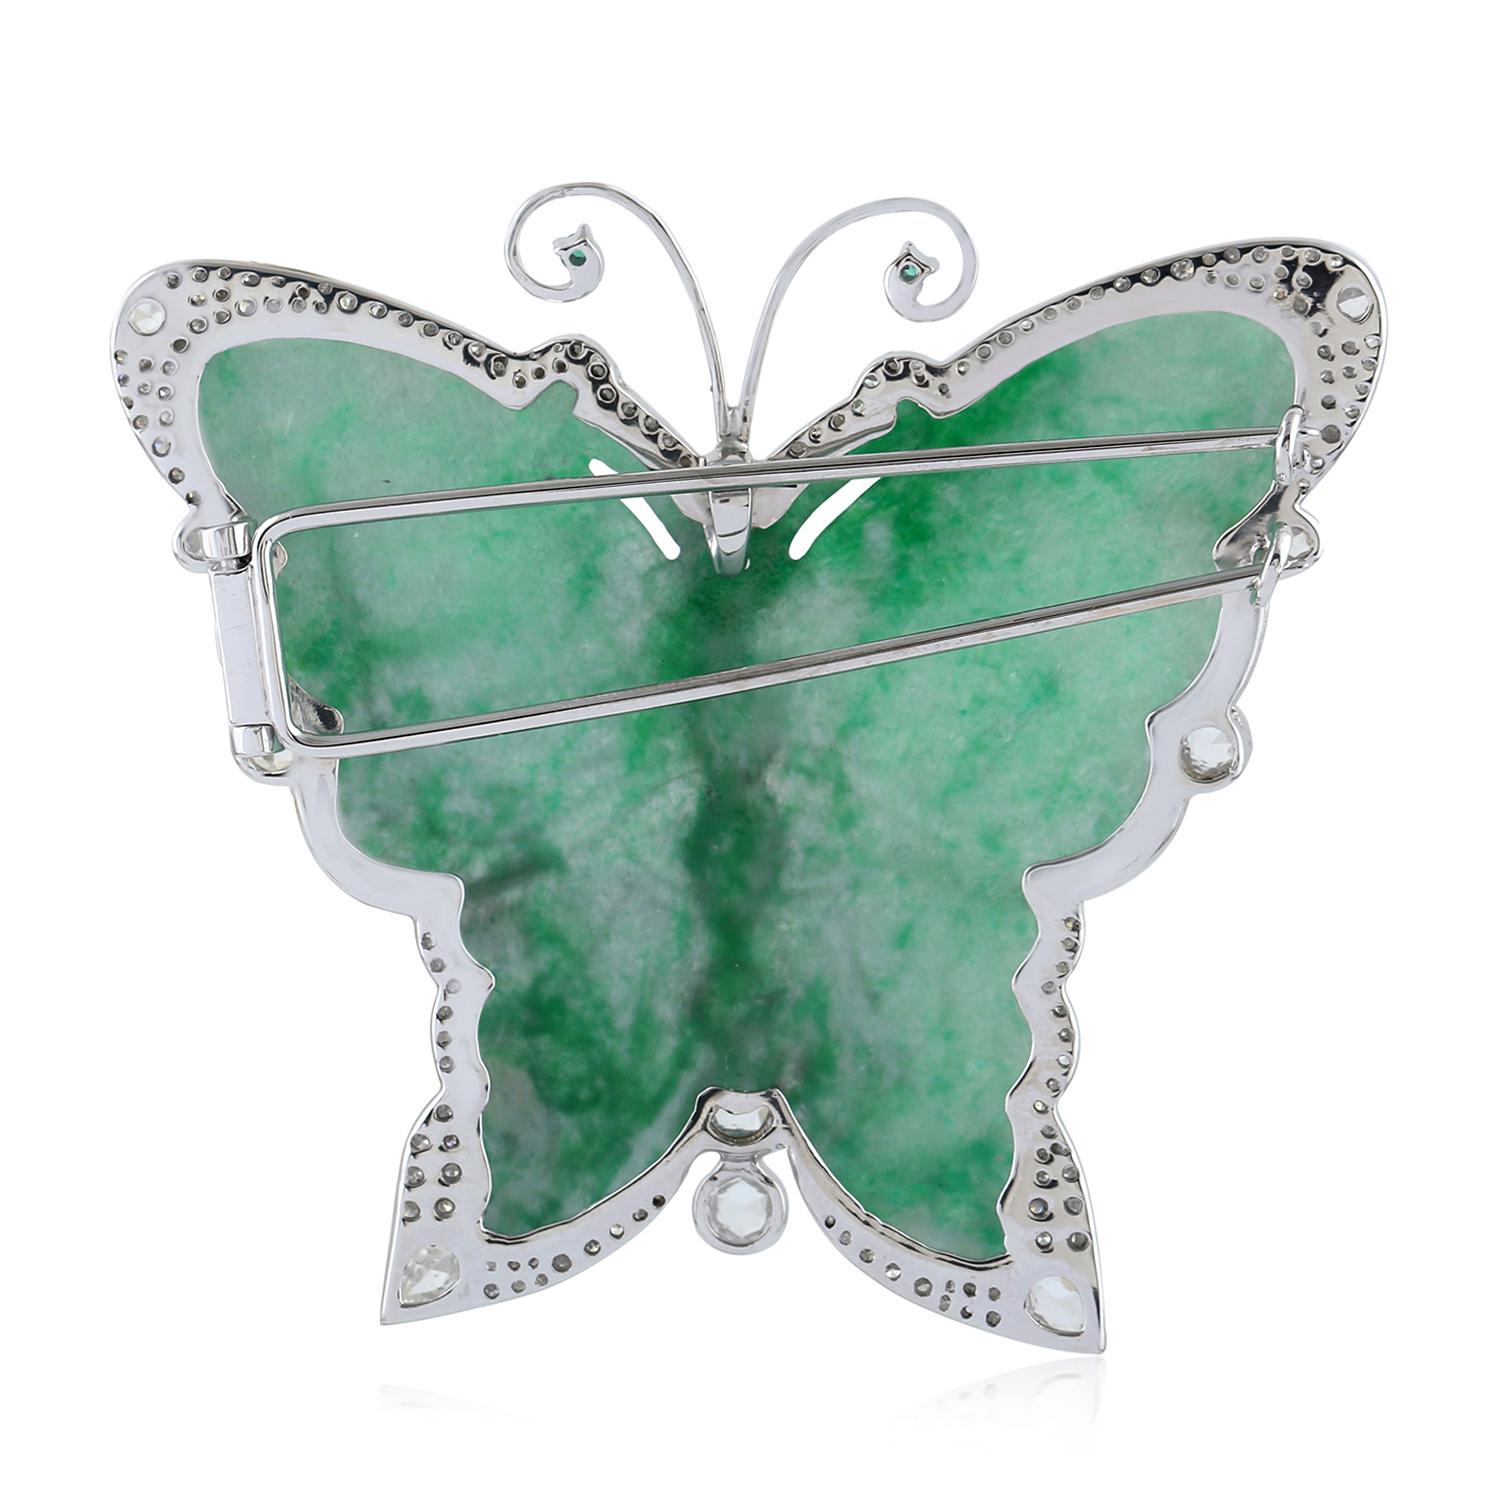 Cast in 18K gold & sterling silver, this stunning brooch is hand set in 29.3 carats Jade, .06 carats emerald and 1.25 carats of sparkling diamonds.

FOLLOW  MEGHNA JEWELS storefront to view the latest collection & exclusive pieces.  Meghna Jewels is